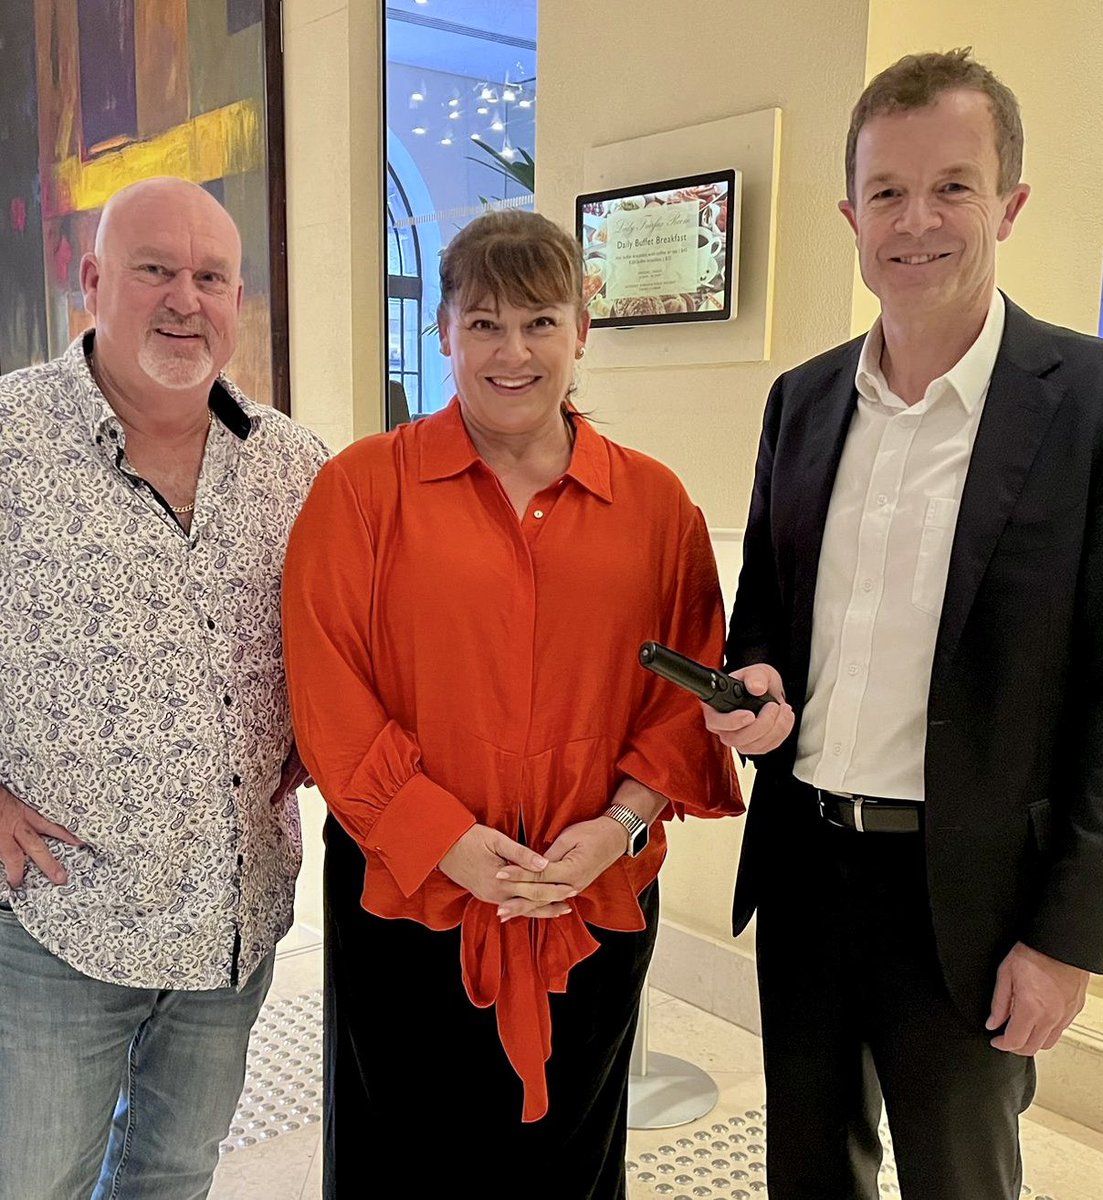 Today I caught up with Brett and Belinda Beasley, parents of Jack, after whom Jack’s Law in Queensland is named. The NSW Liberals and Nationals support rolling it out across NSW public places. Wanding will deter carrying knives, therefore reducing knife crimes and saving lives.